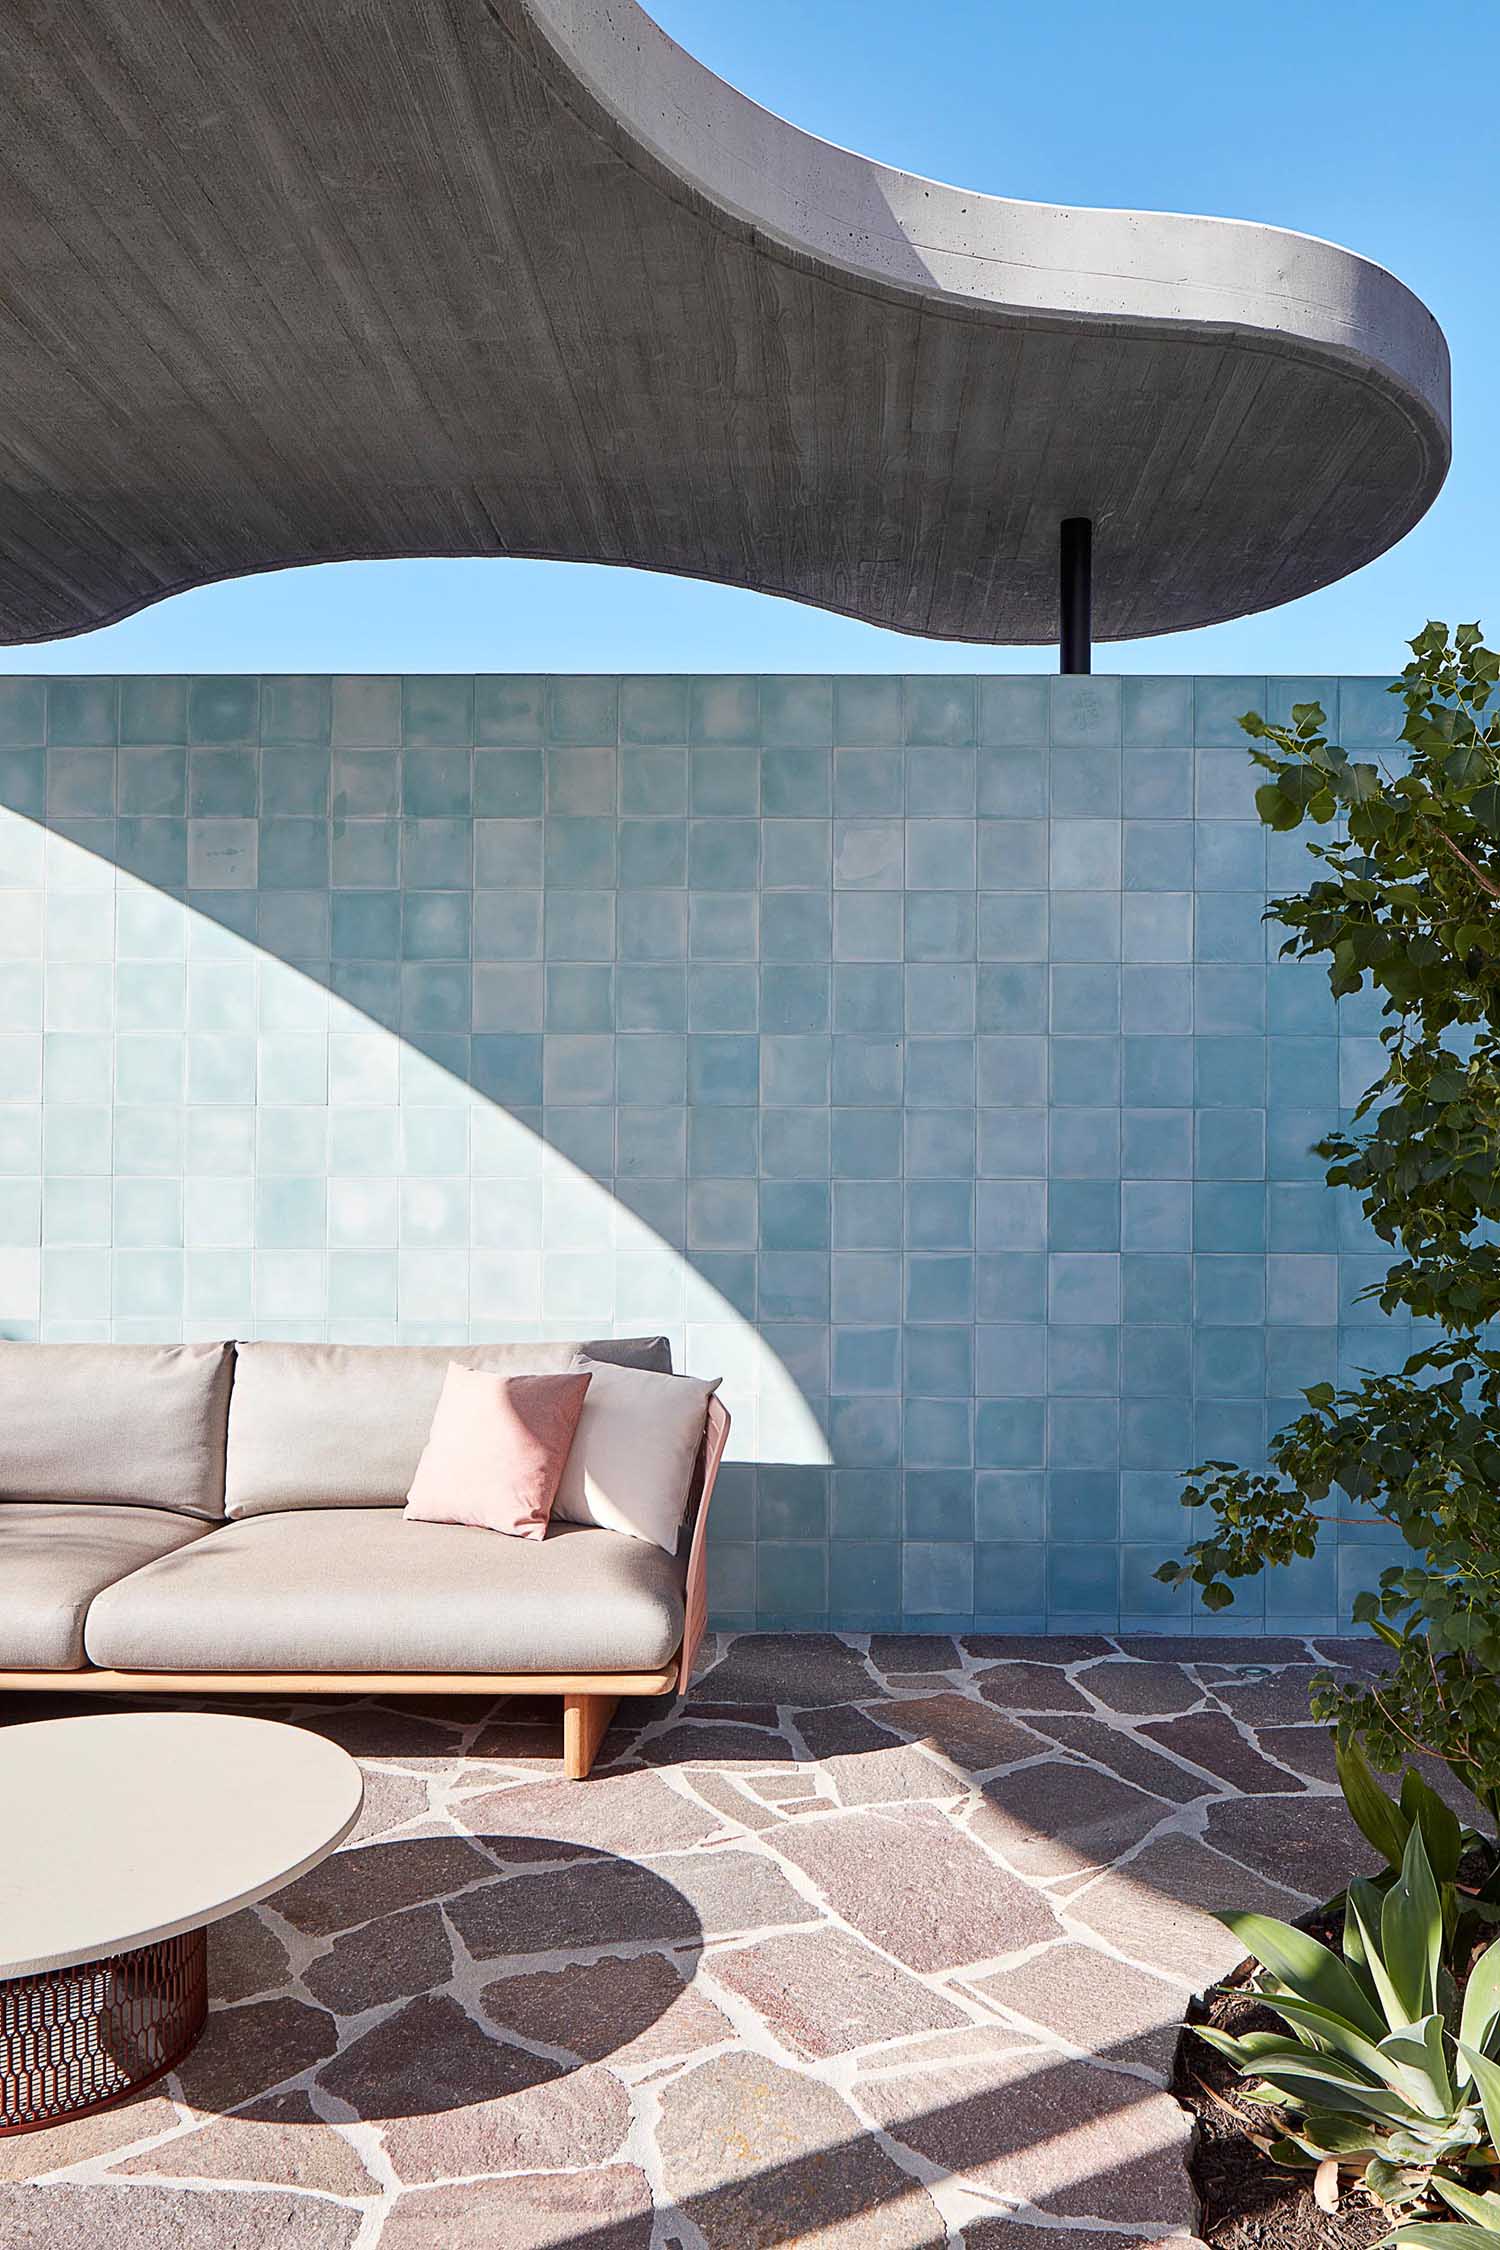 A modern patio with blue tiles and a pink couch.